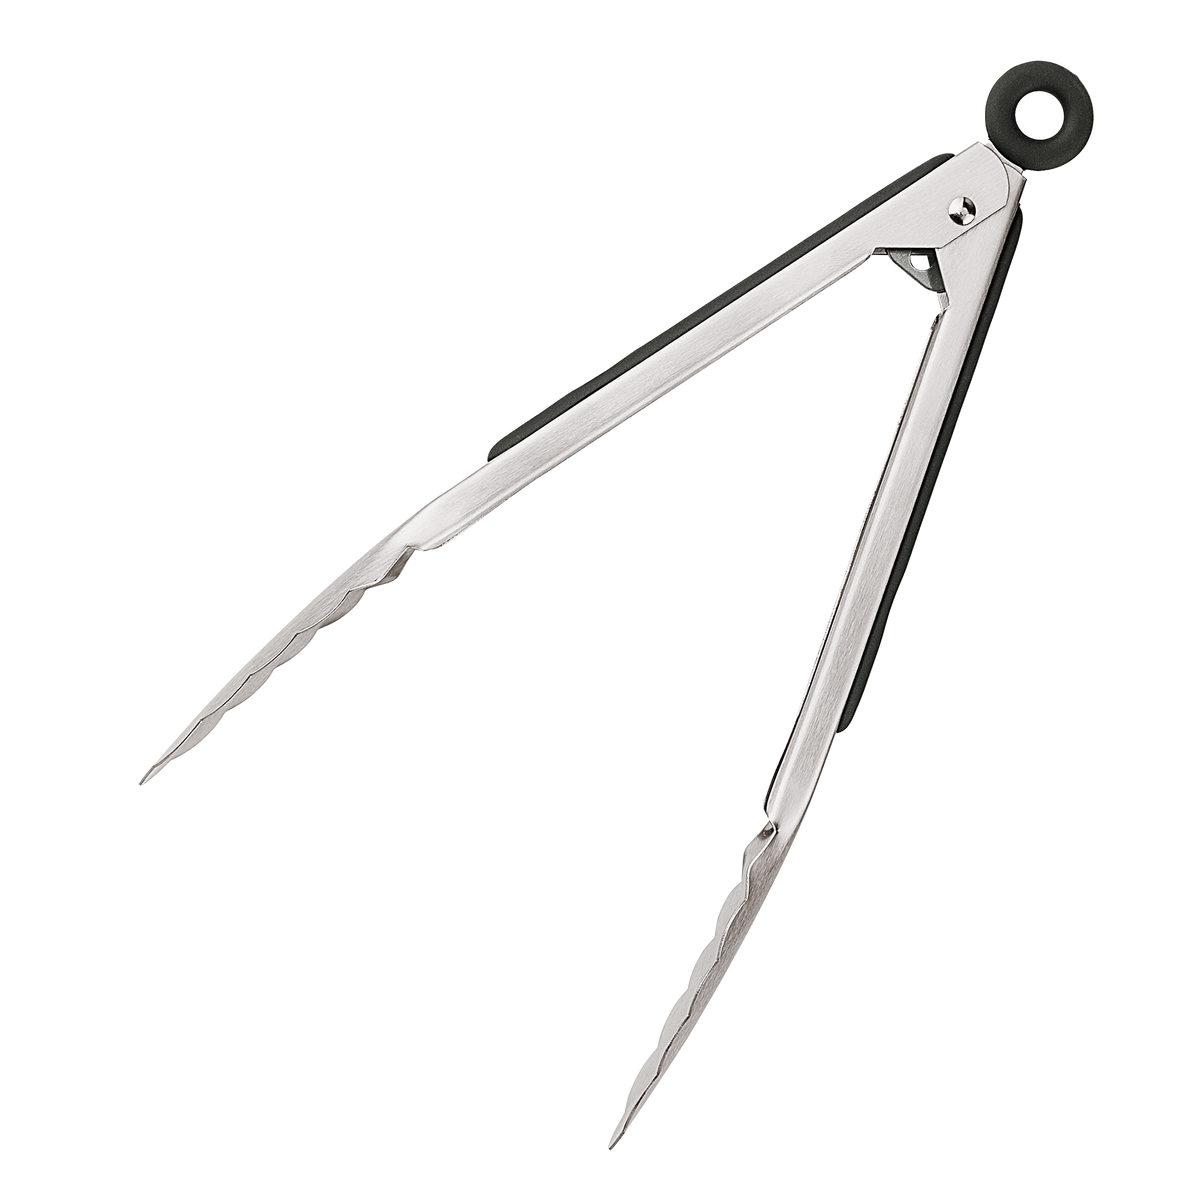 Product photo, side view, 9 inch stainless steel tongs in their open position.